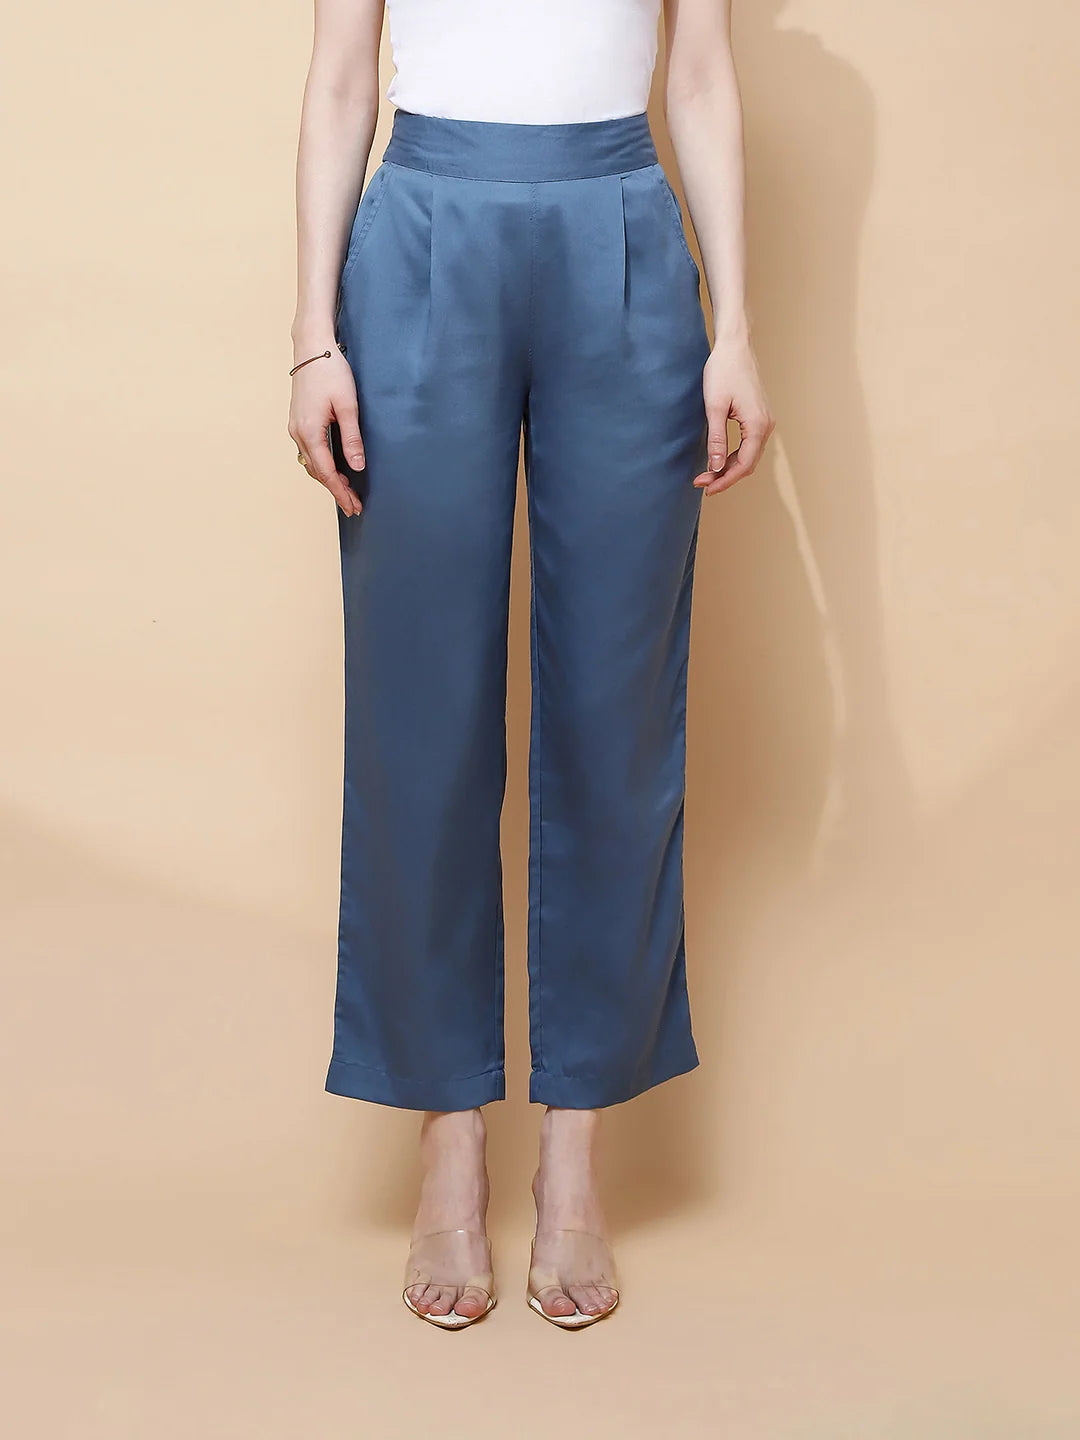 Blue Rayon Regular Fit Lower For Women